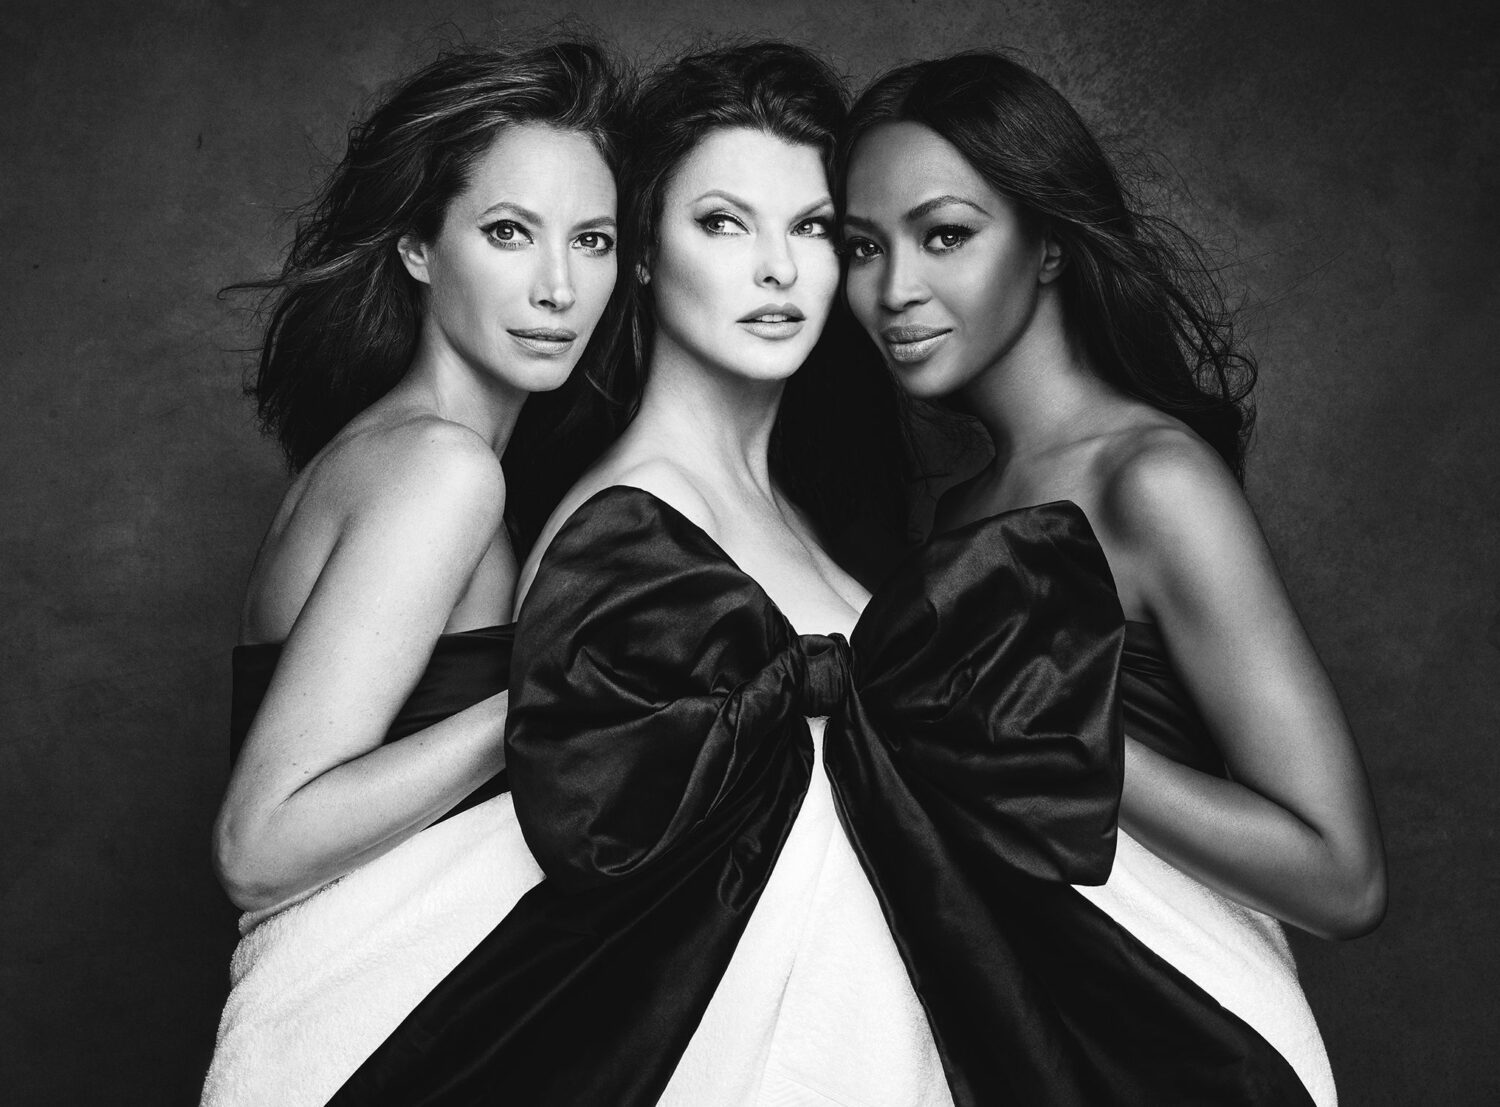 Patrick Demarchelier: Christy, Linda, and Naomi